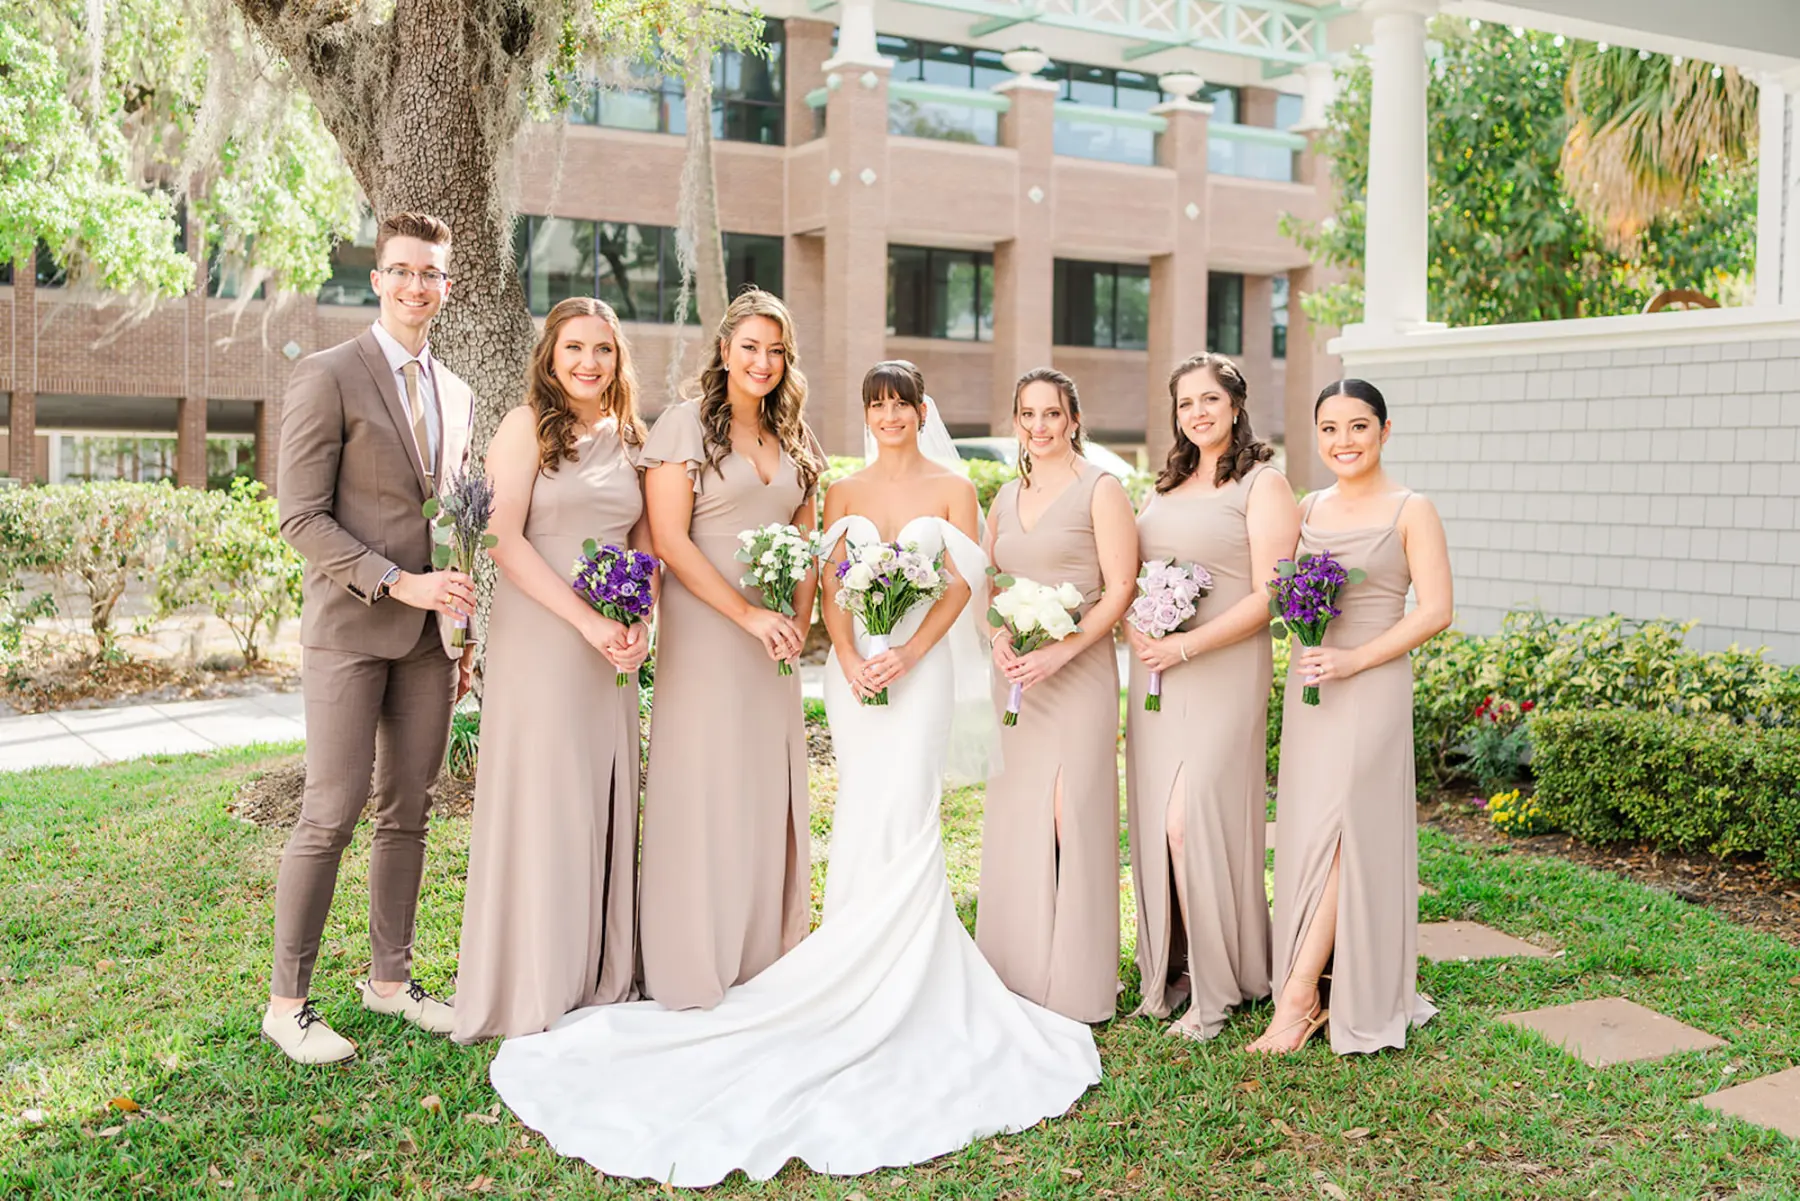 Mismatched Tan Neutral Birdy Grey Bridesmaids Dresses with Tan Suit | Wedding Party Inspiration